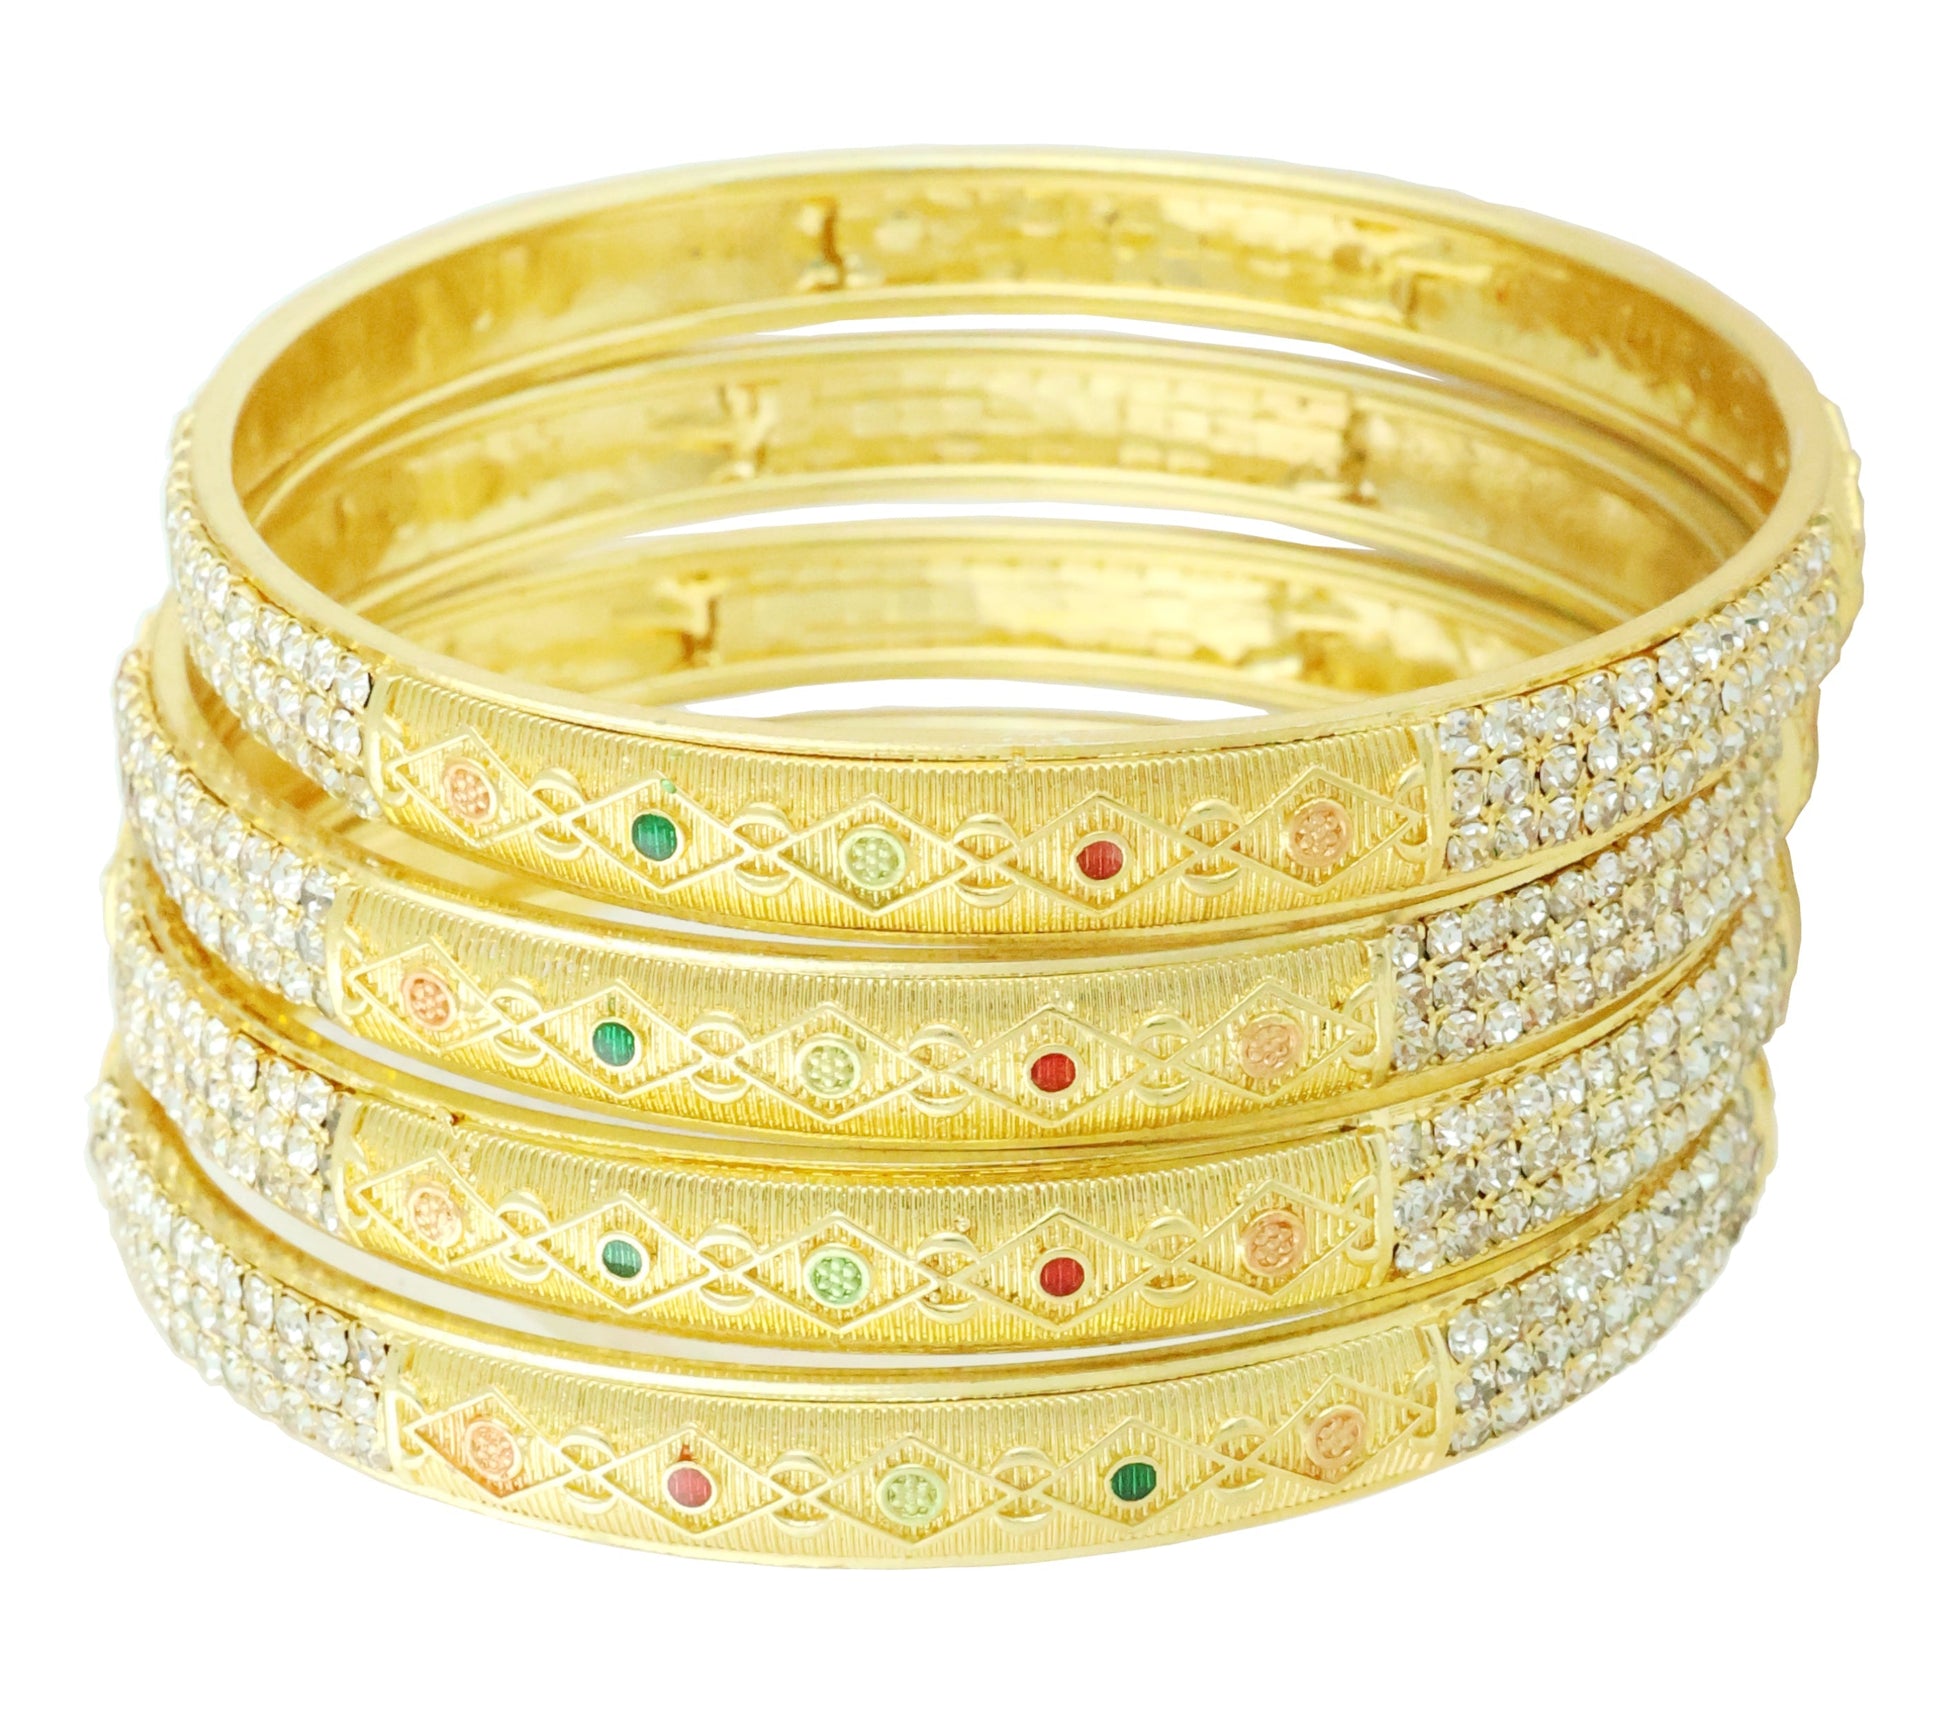 Bhagya Lakshmi Gold Plated for a luxurious look Stunning bangle design High-quality materials 